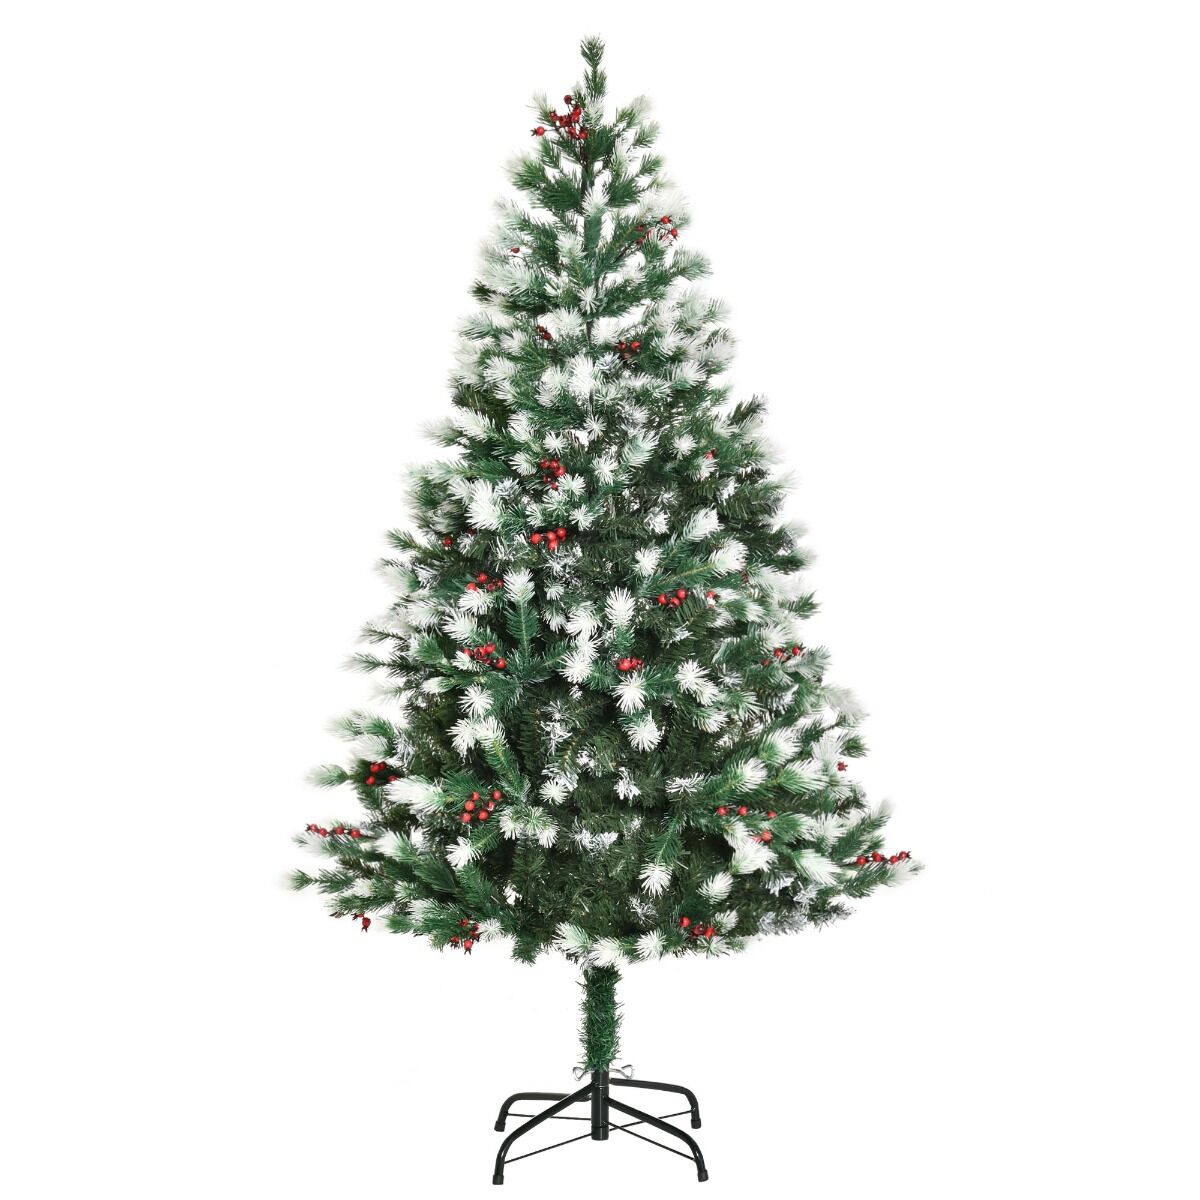 HOMCOM 5ft Artificial Snow-Flocked Pine Tree, Holiday Home Christmas Decoration Tree with Red Berries, Automatic Open, Green/White